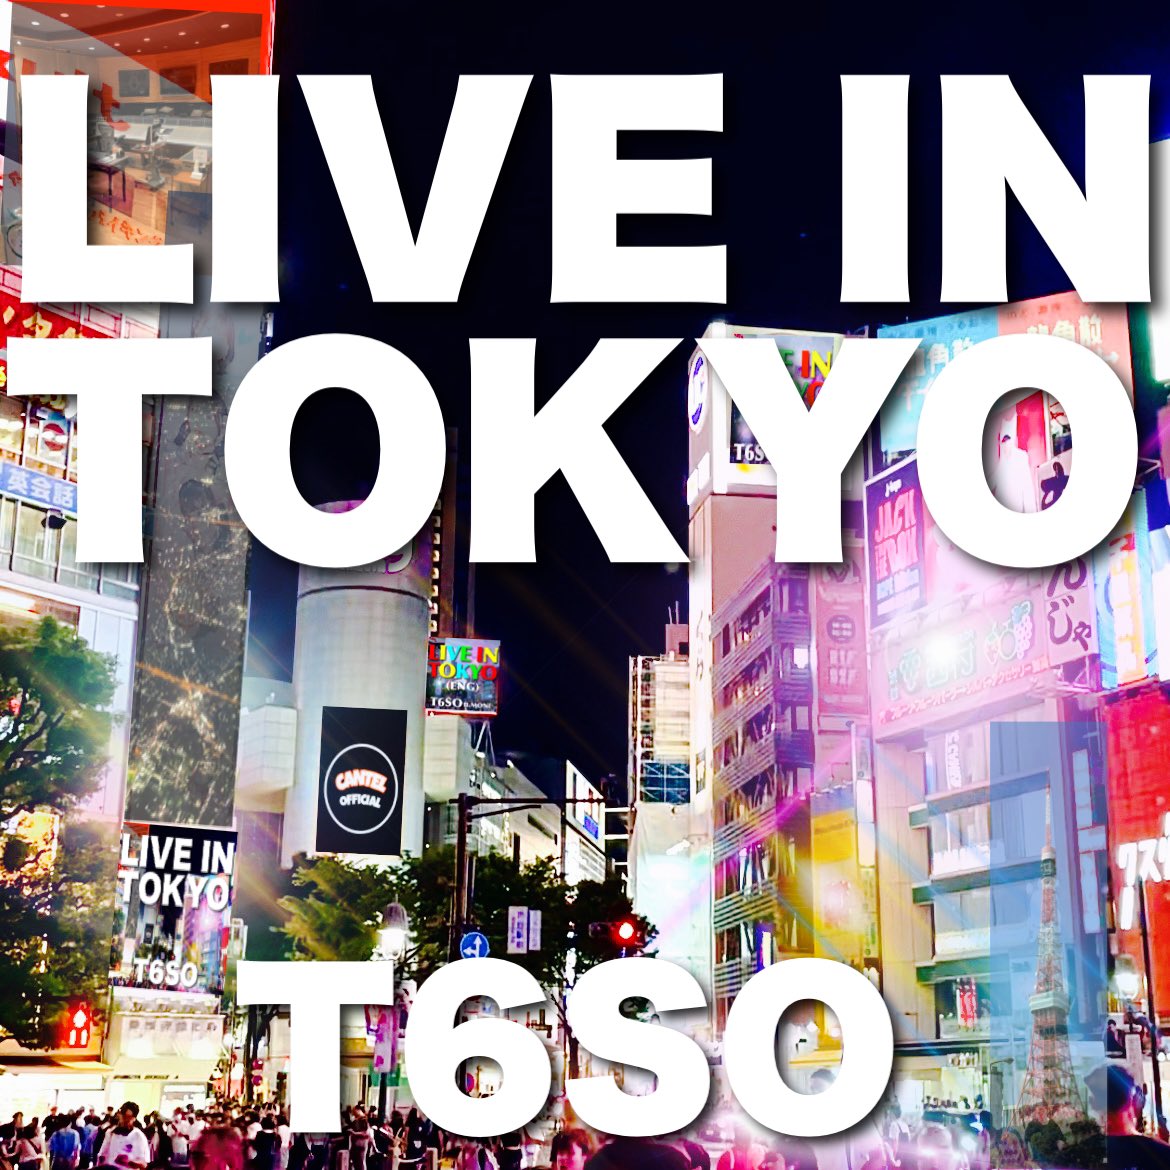 T6SO-LIVE IN TOKYO 気に入って貰えたら いいね！チャンネル登録お願いします。I hope you like it! Please subscribe to the channel. #tokyo #shibuya #logicpro #dtm youtu.be/6ae8KreQcVs?si… @YouTube